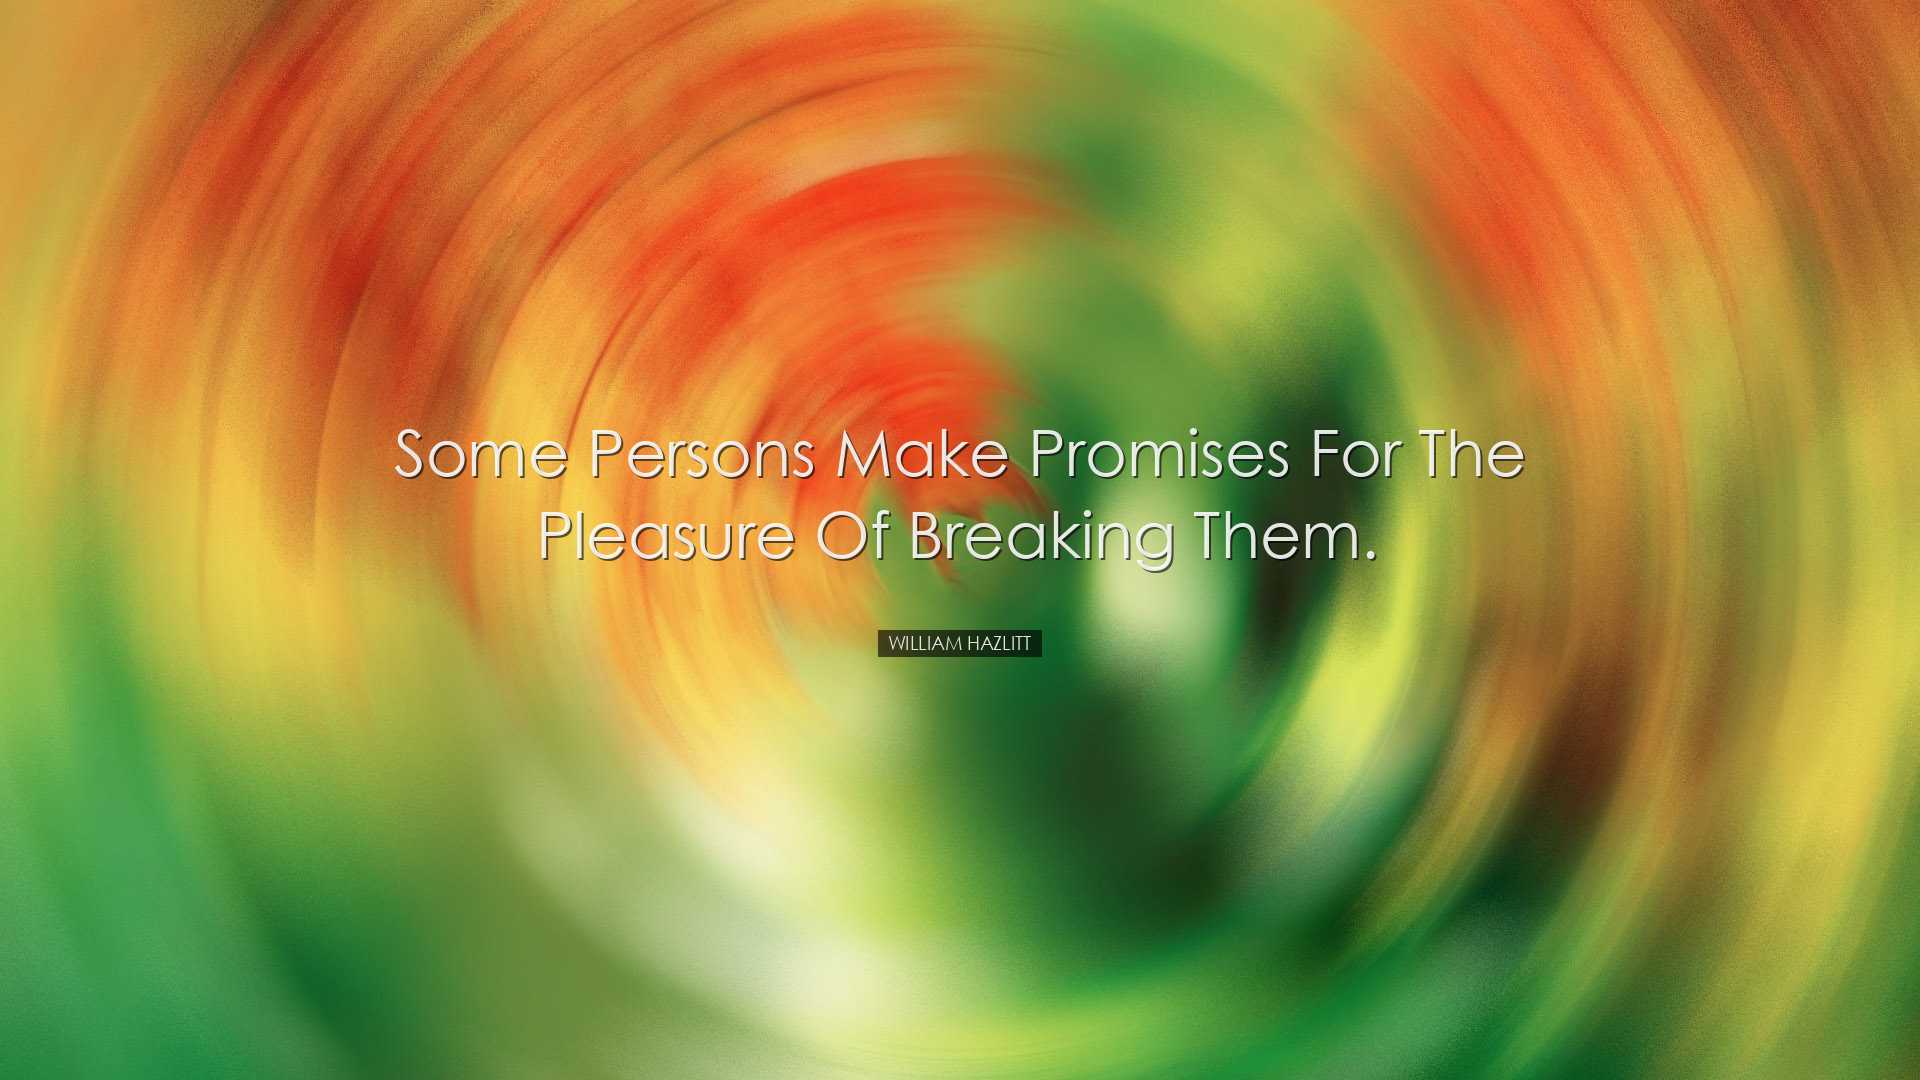 Some persons make promises for the pleasure of breaking them. - Wi